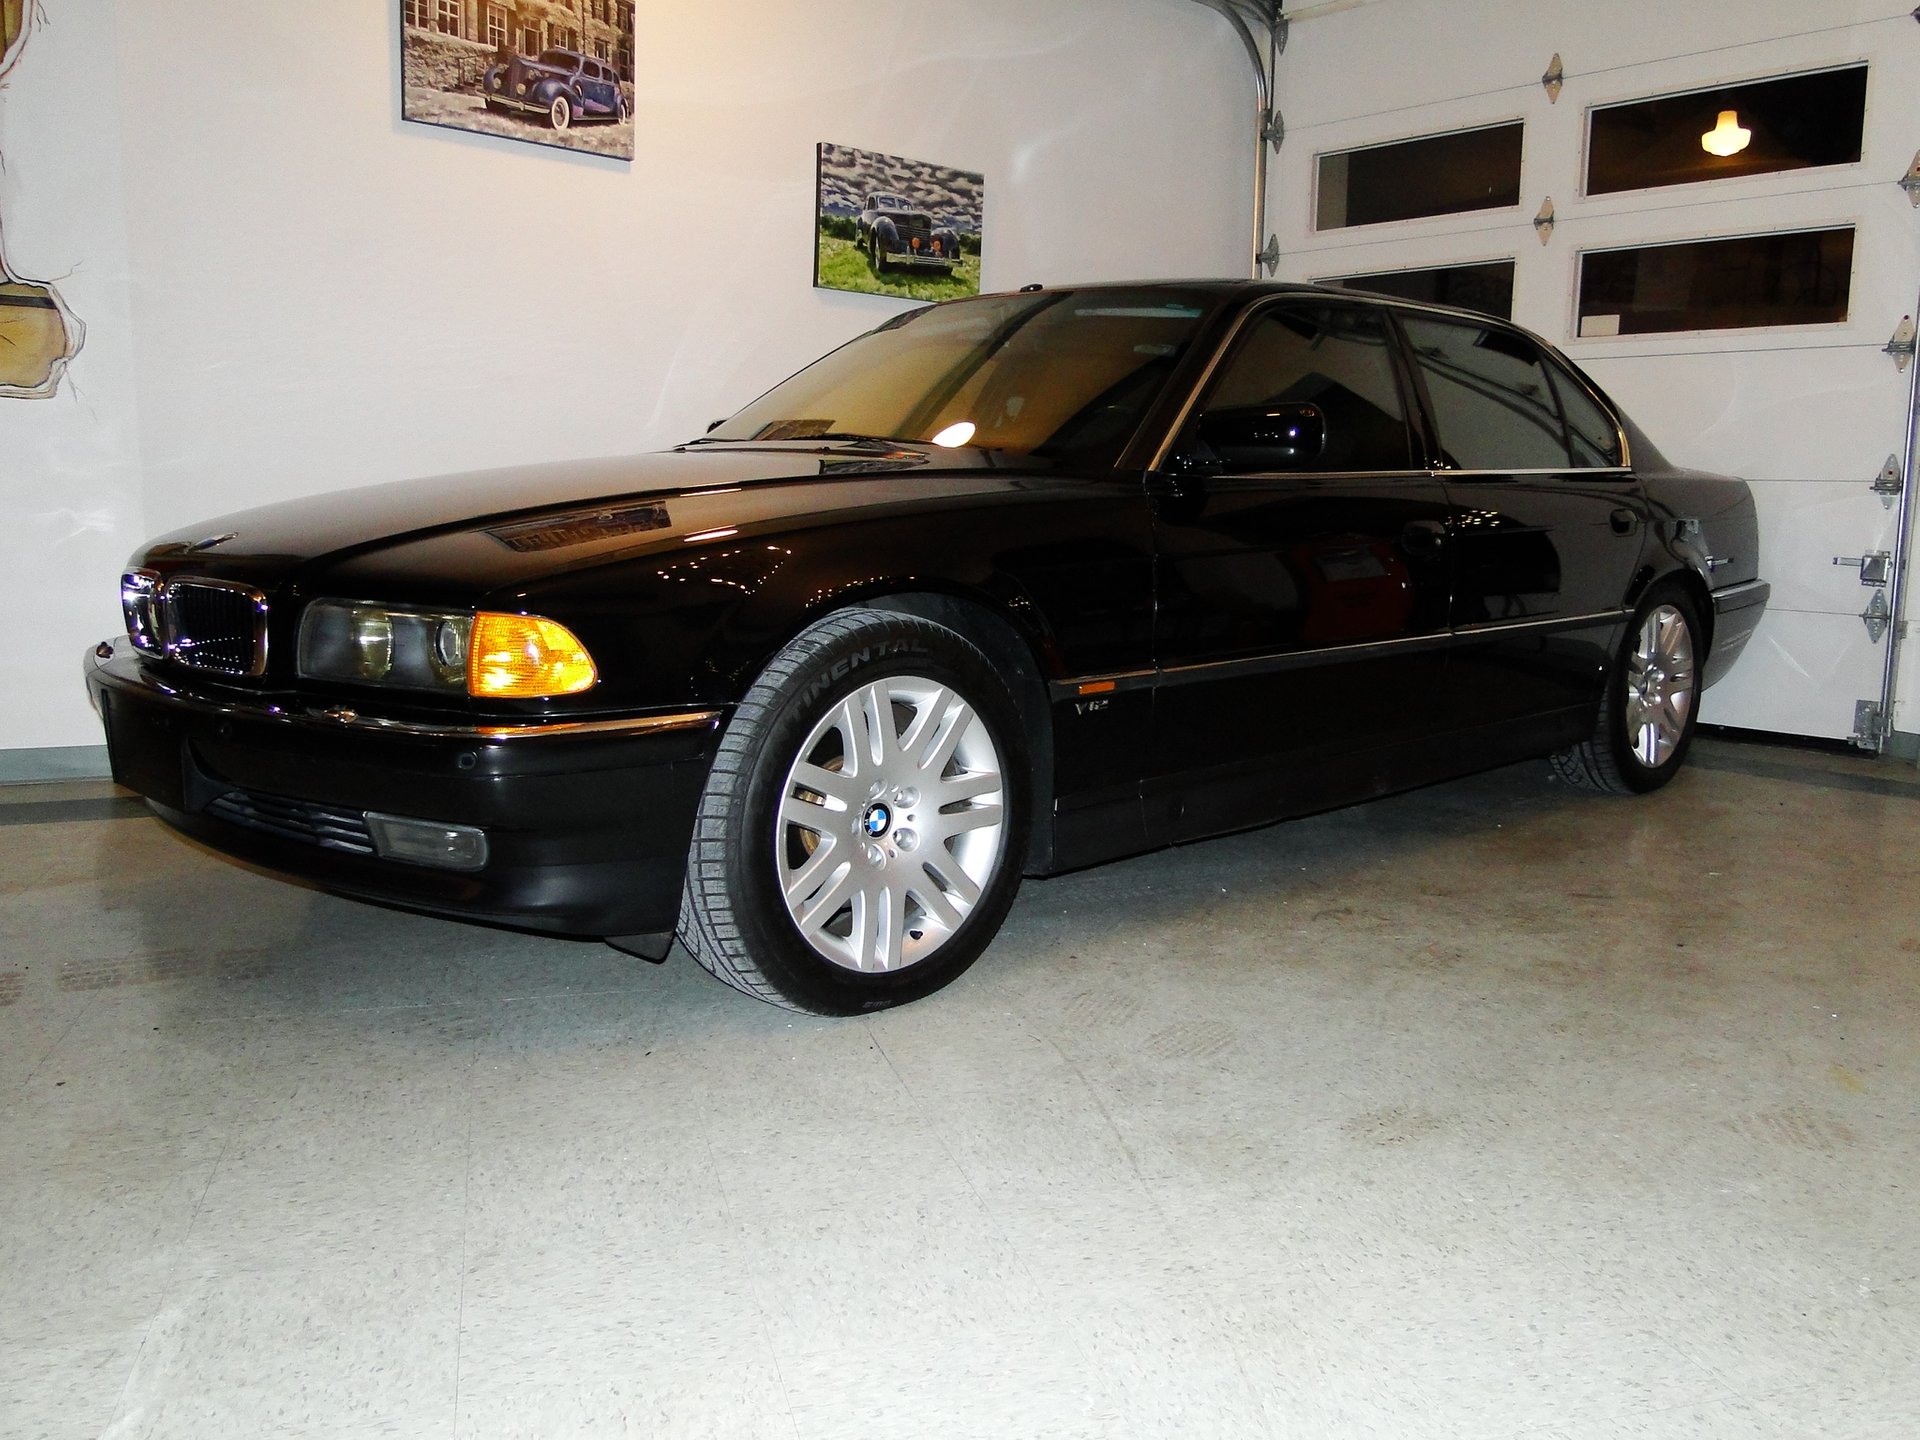 1997 BMW 750il | Legendary Motors - Classic Cars, Muscle Cars, Hot Rods &  Antique Cars - Rowley, MA